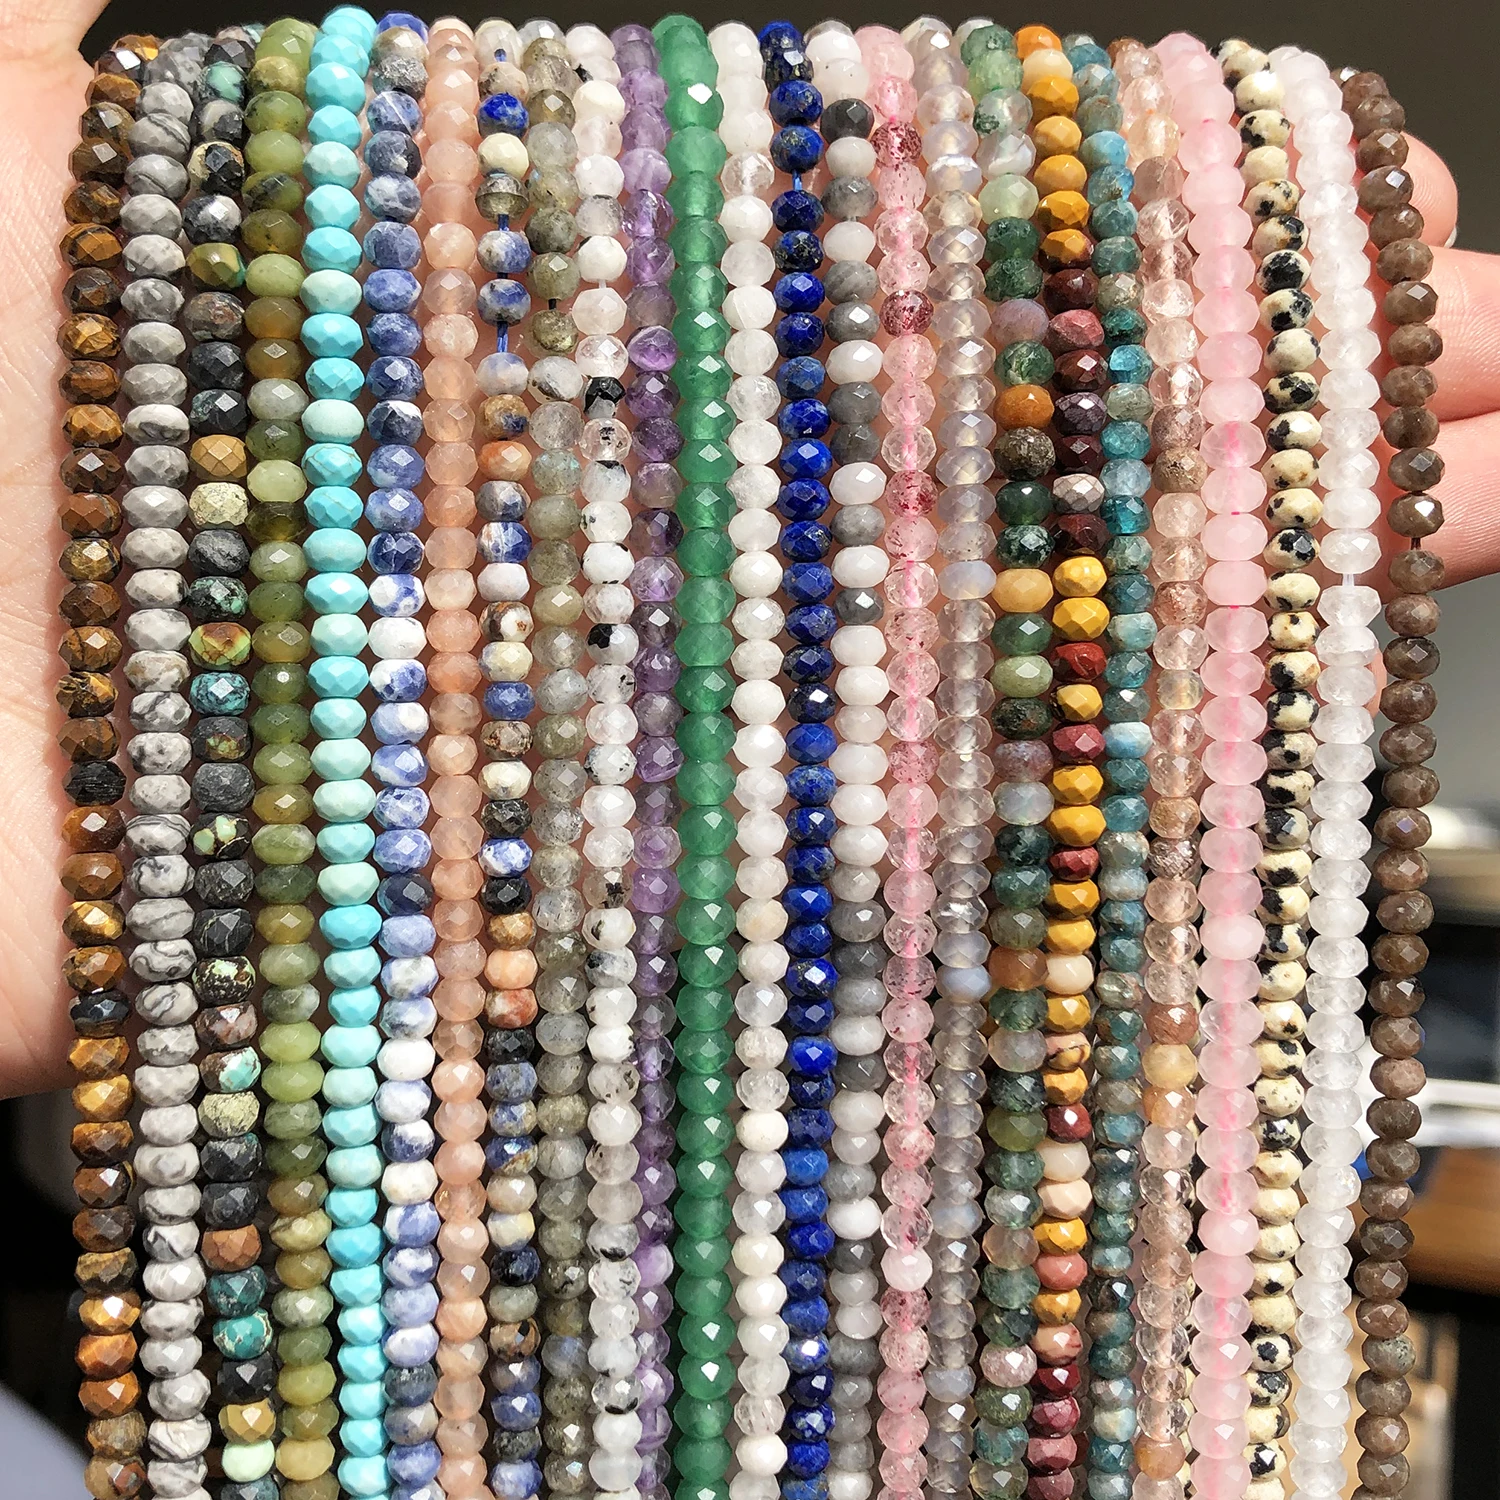 Small Waist Beads 2 3 4mm Natural African Turquoises Loose Stone Beads for  Jewelry DIY Making Bracelet Earrings Accessories 15